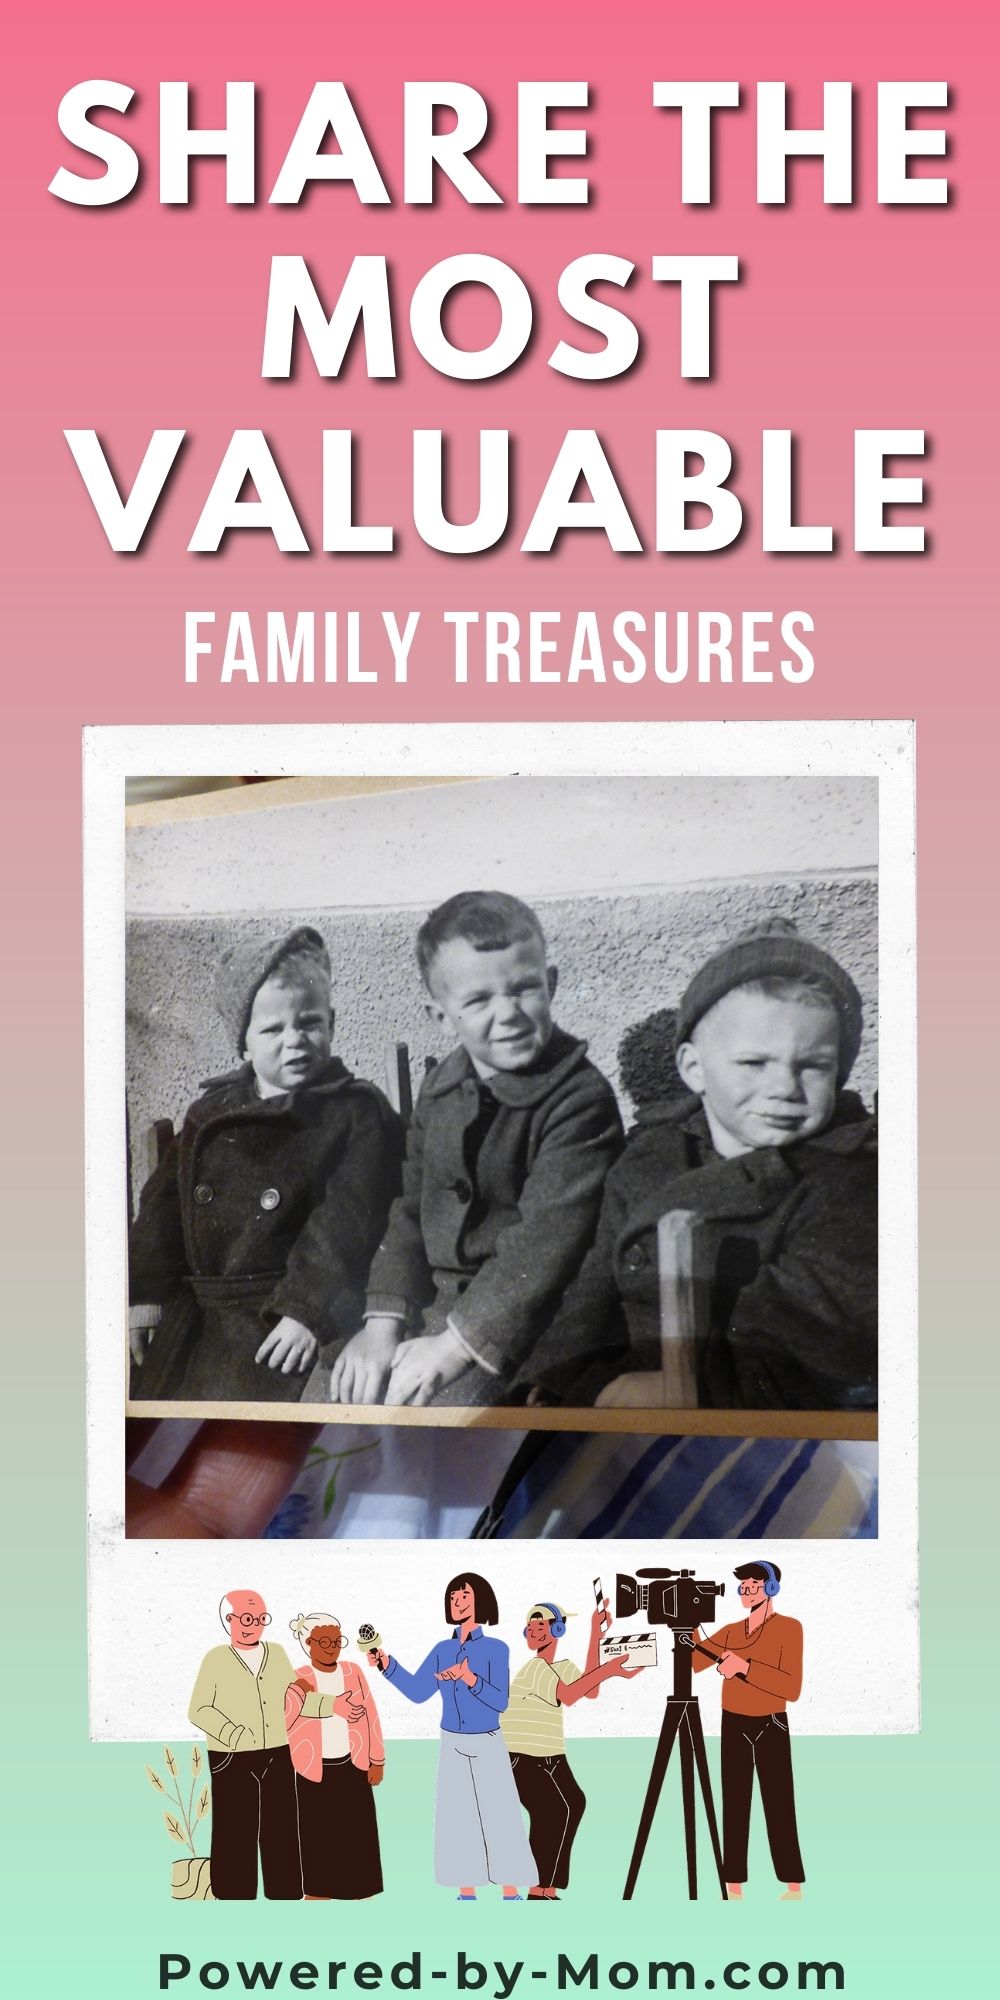 Preserve family treasures in the form of stories and memories from friends and family with this wonderful platform that creates a family keepsake. 